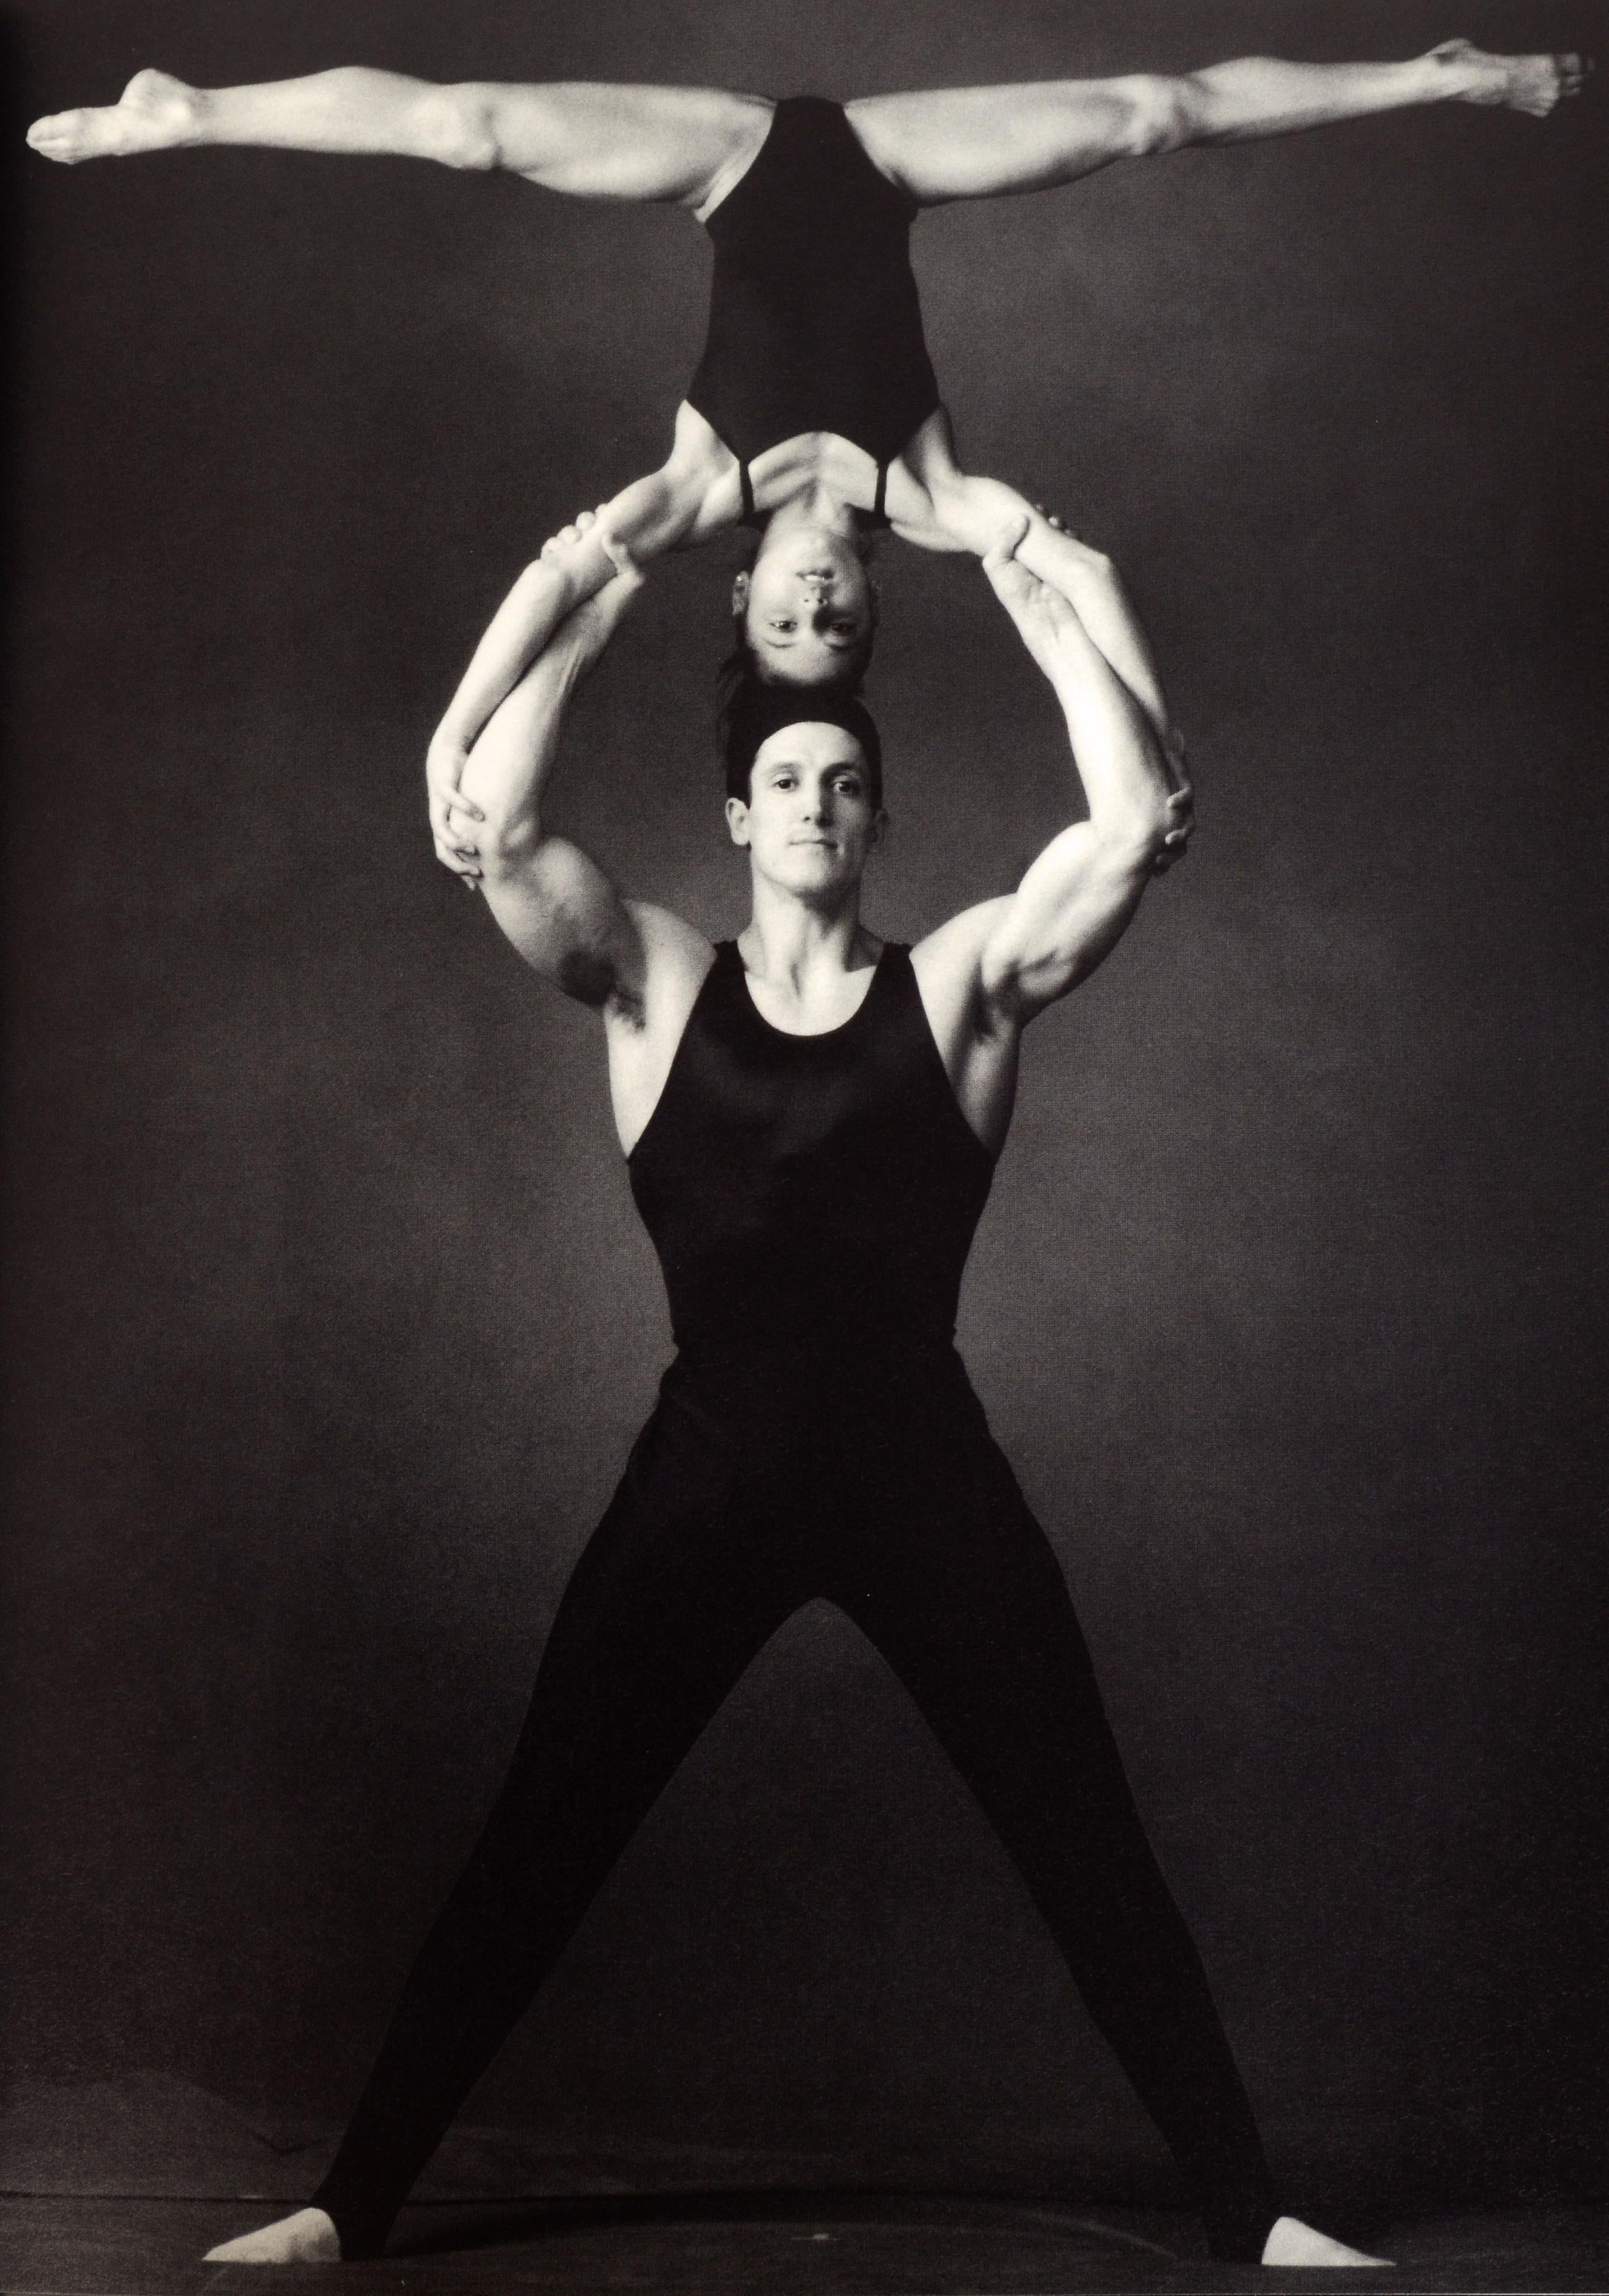 Portraits olympiques d'Annie Leibovitz, Stated 1st Ed en vente 3